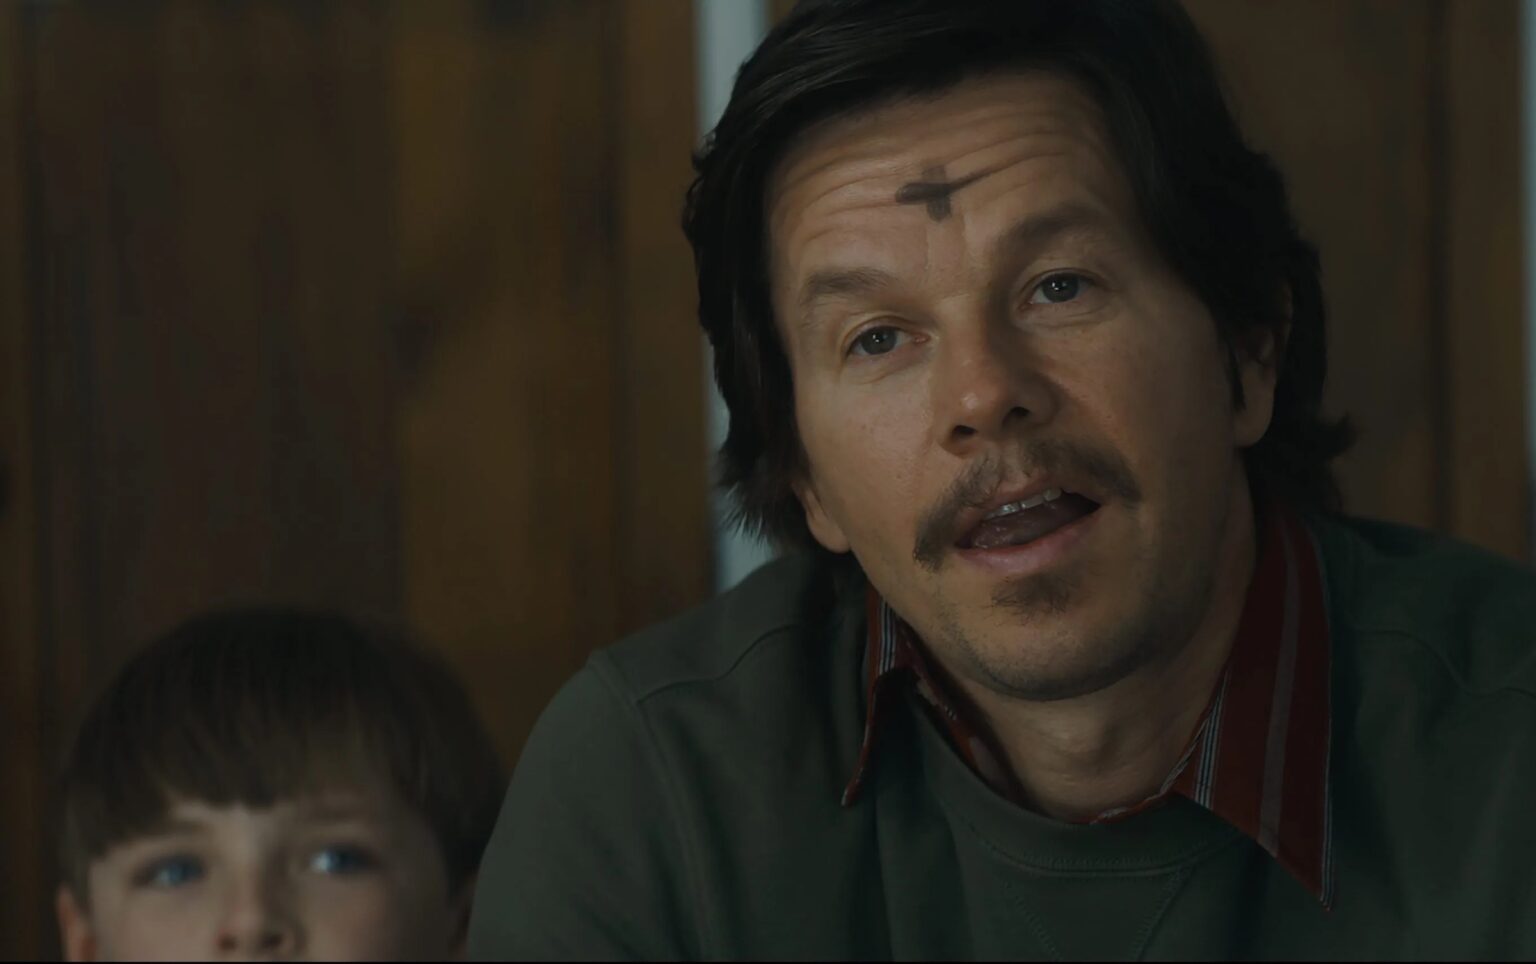 'Father Stu' is finally here. Find out where to stream the anticipated Mark Wahlberg movie online for free here at home.